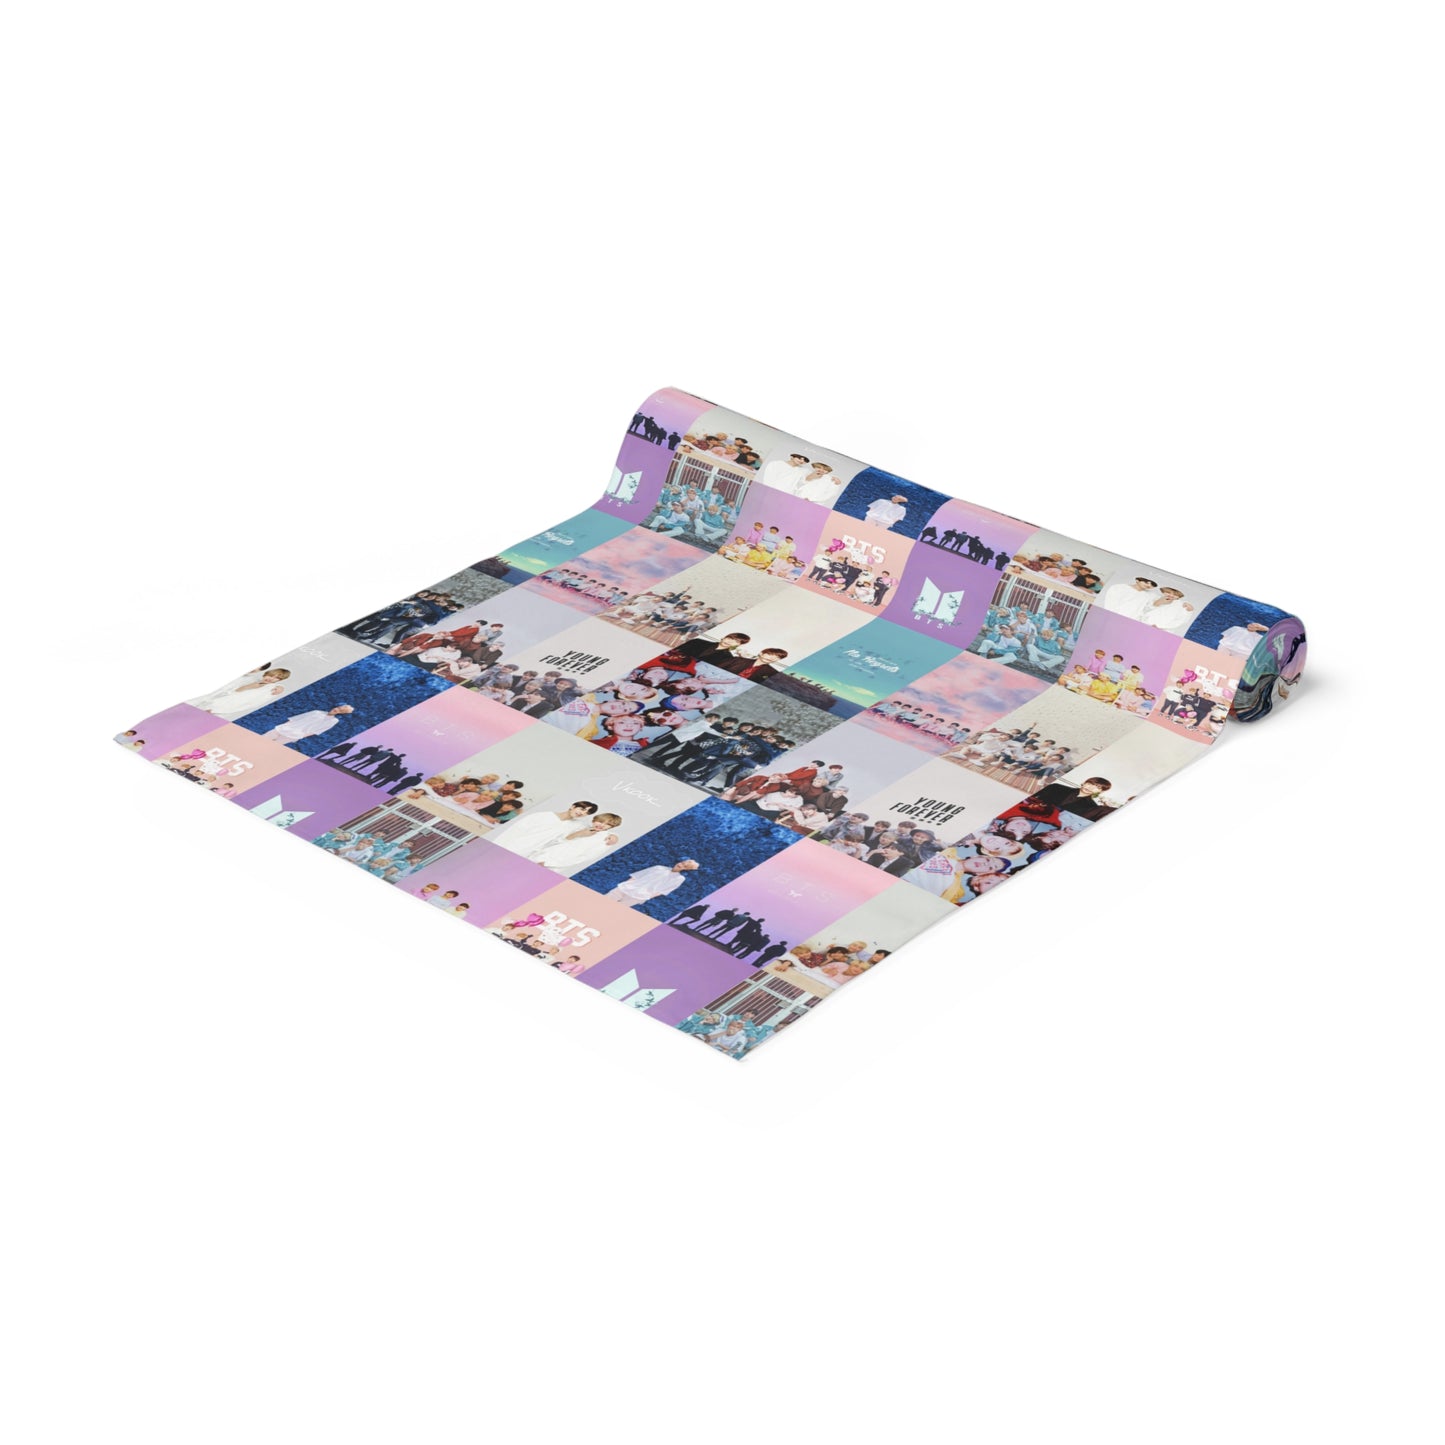 BTS Pastel Aesthetic Collage Table Runner